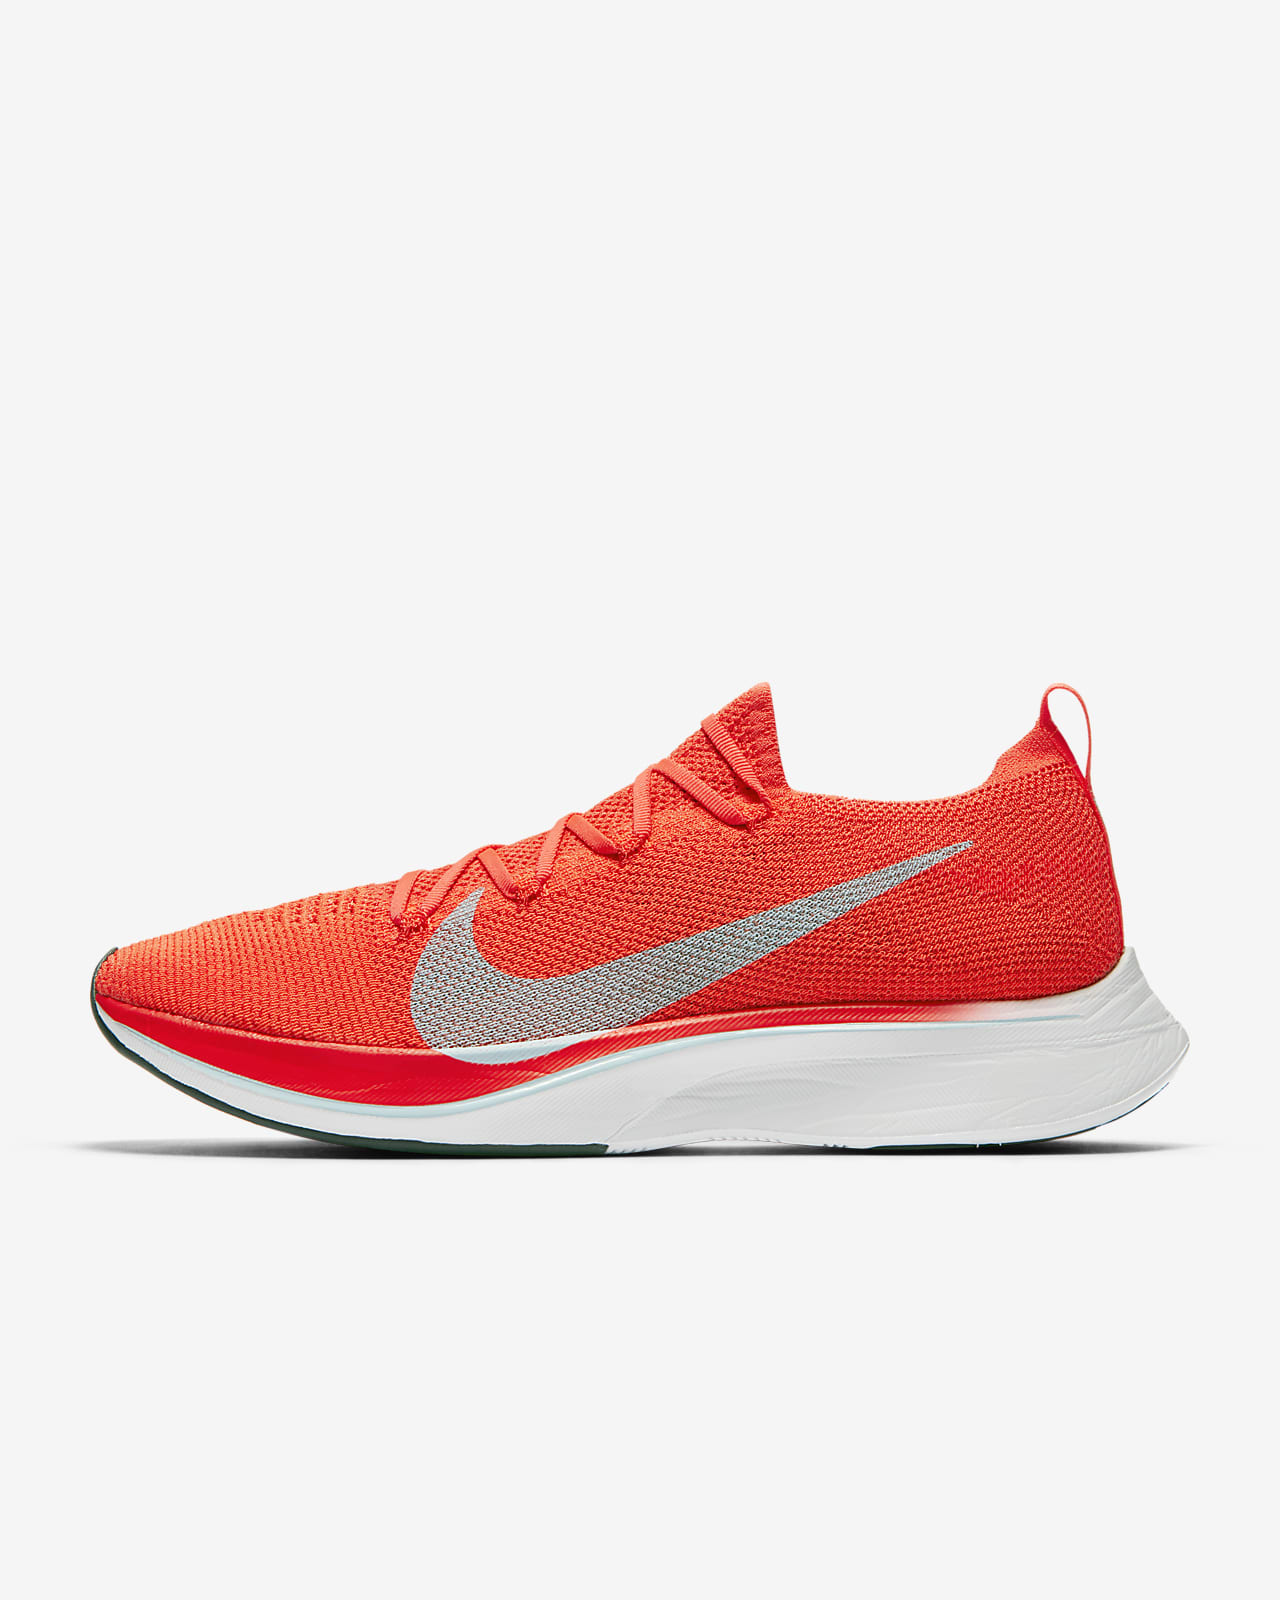 nike flyknit shoes price